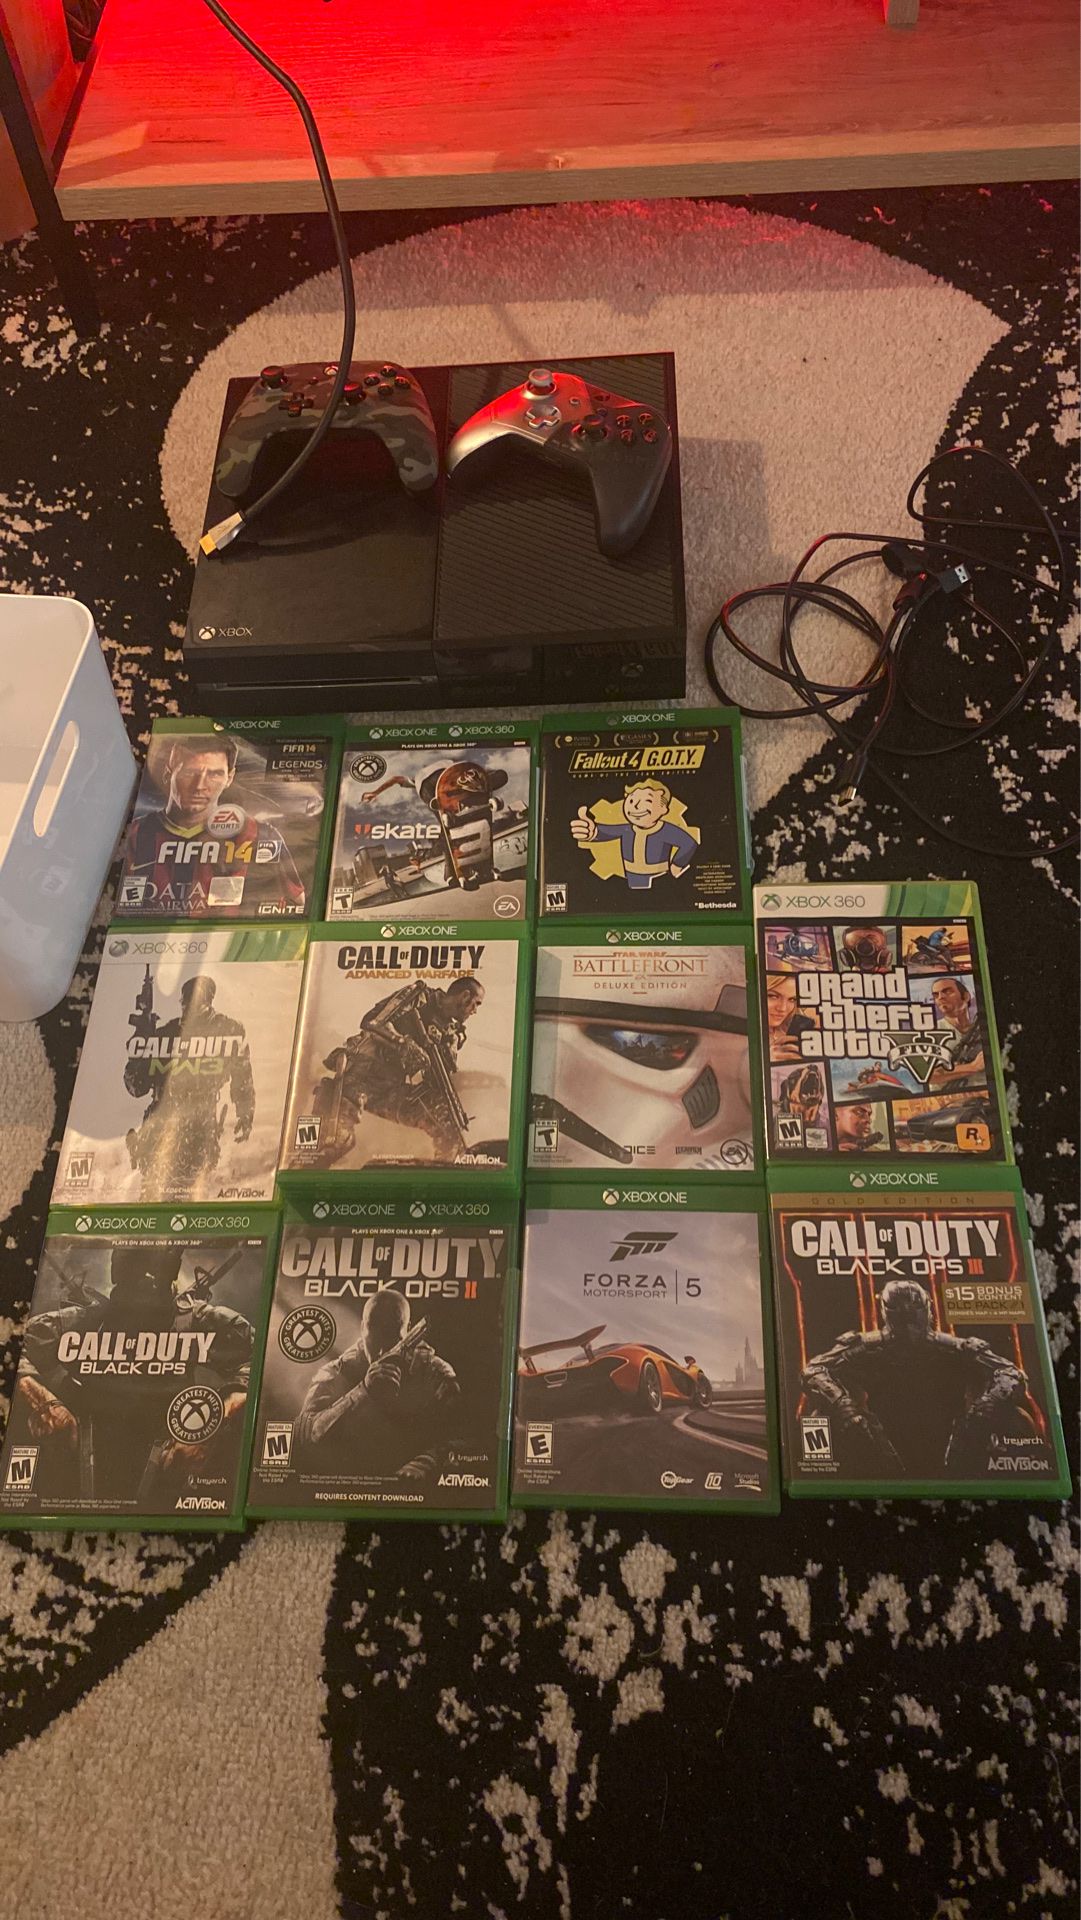 Xbox one with 2 hdmi cords, main power cord, and 11 games